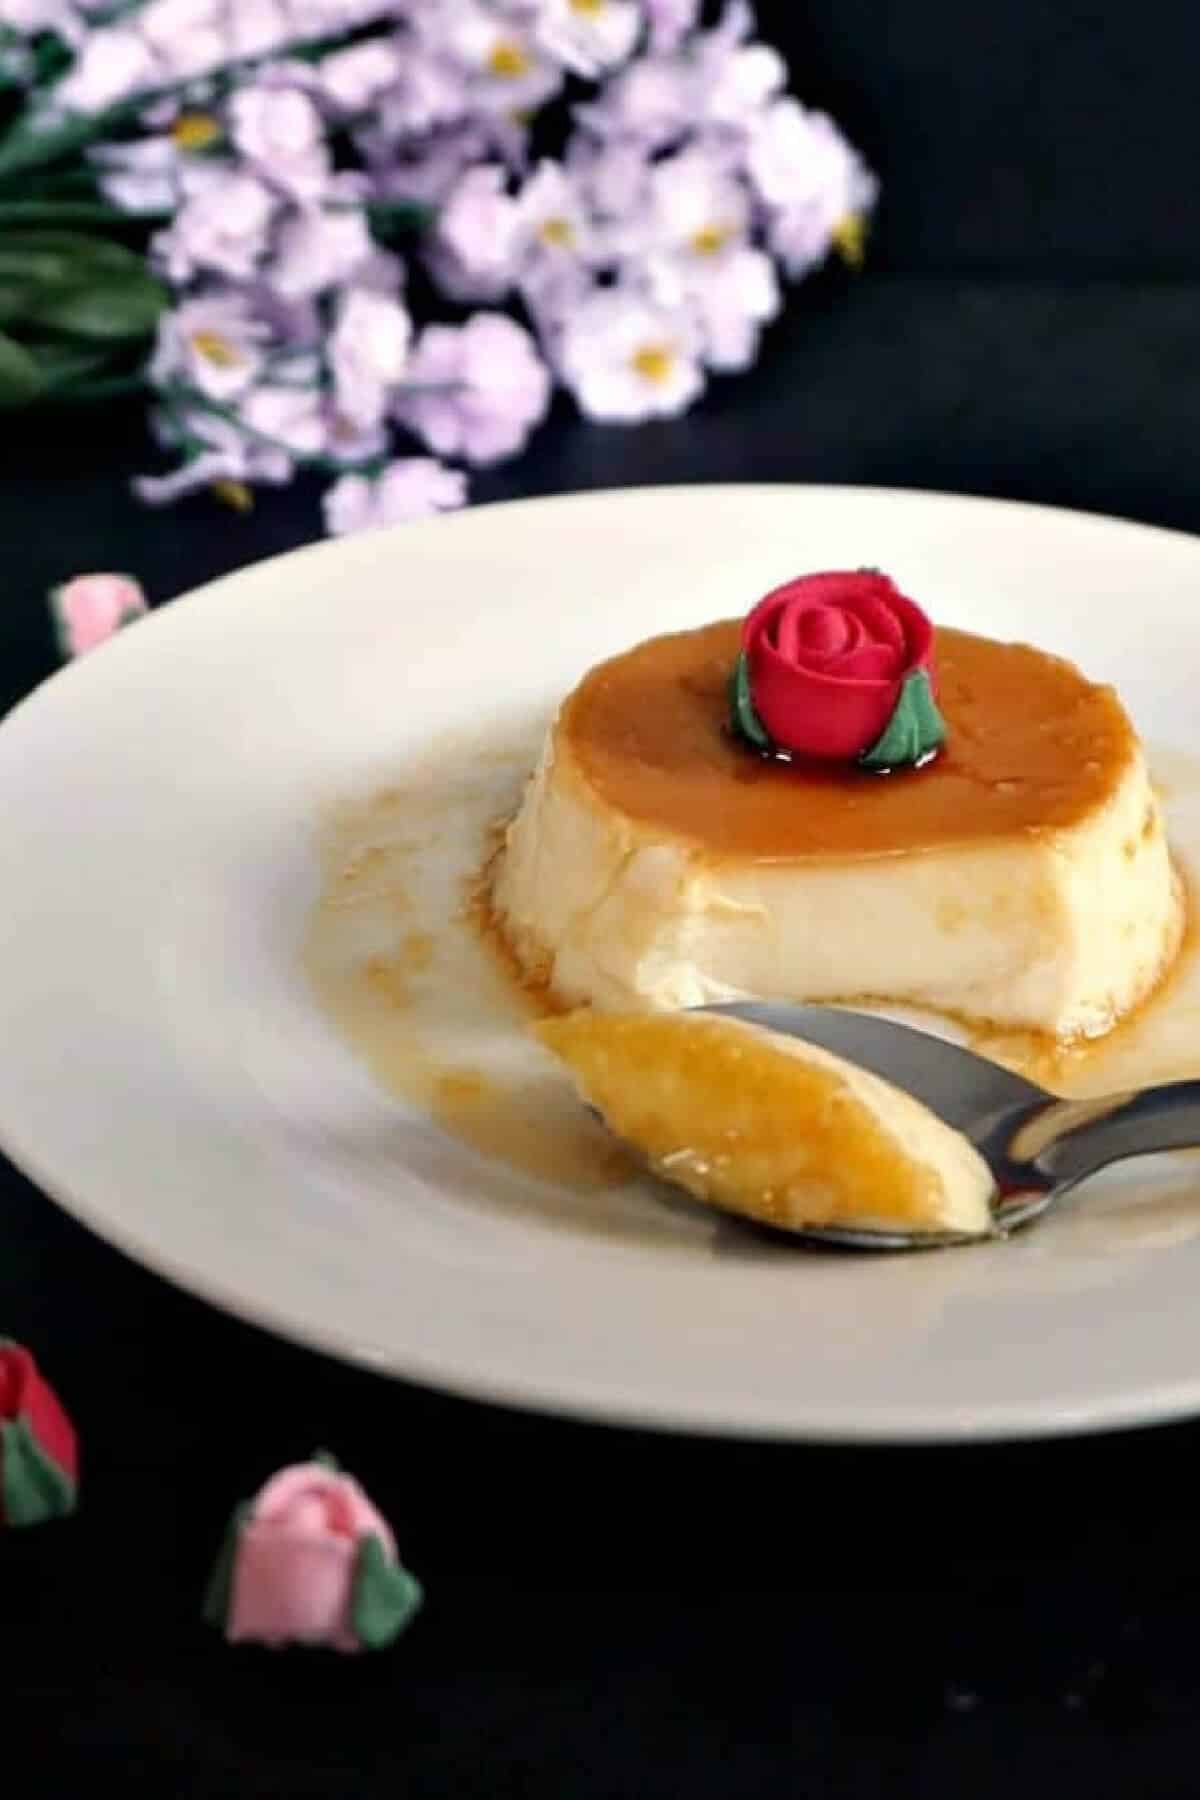 A plate with a portion of flan.